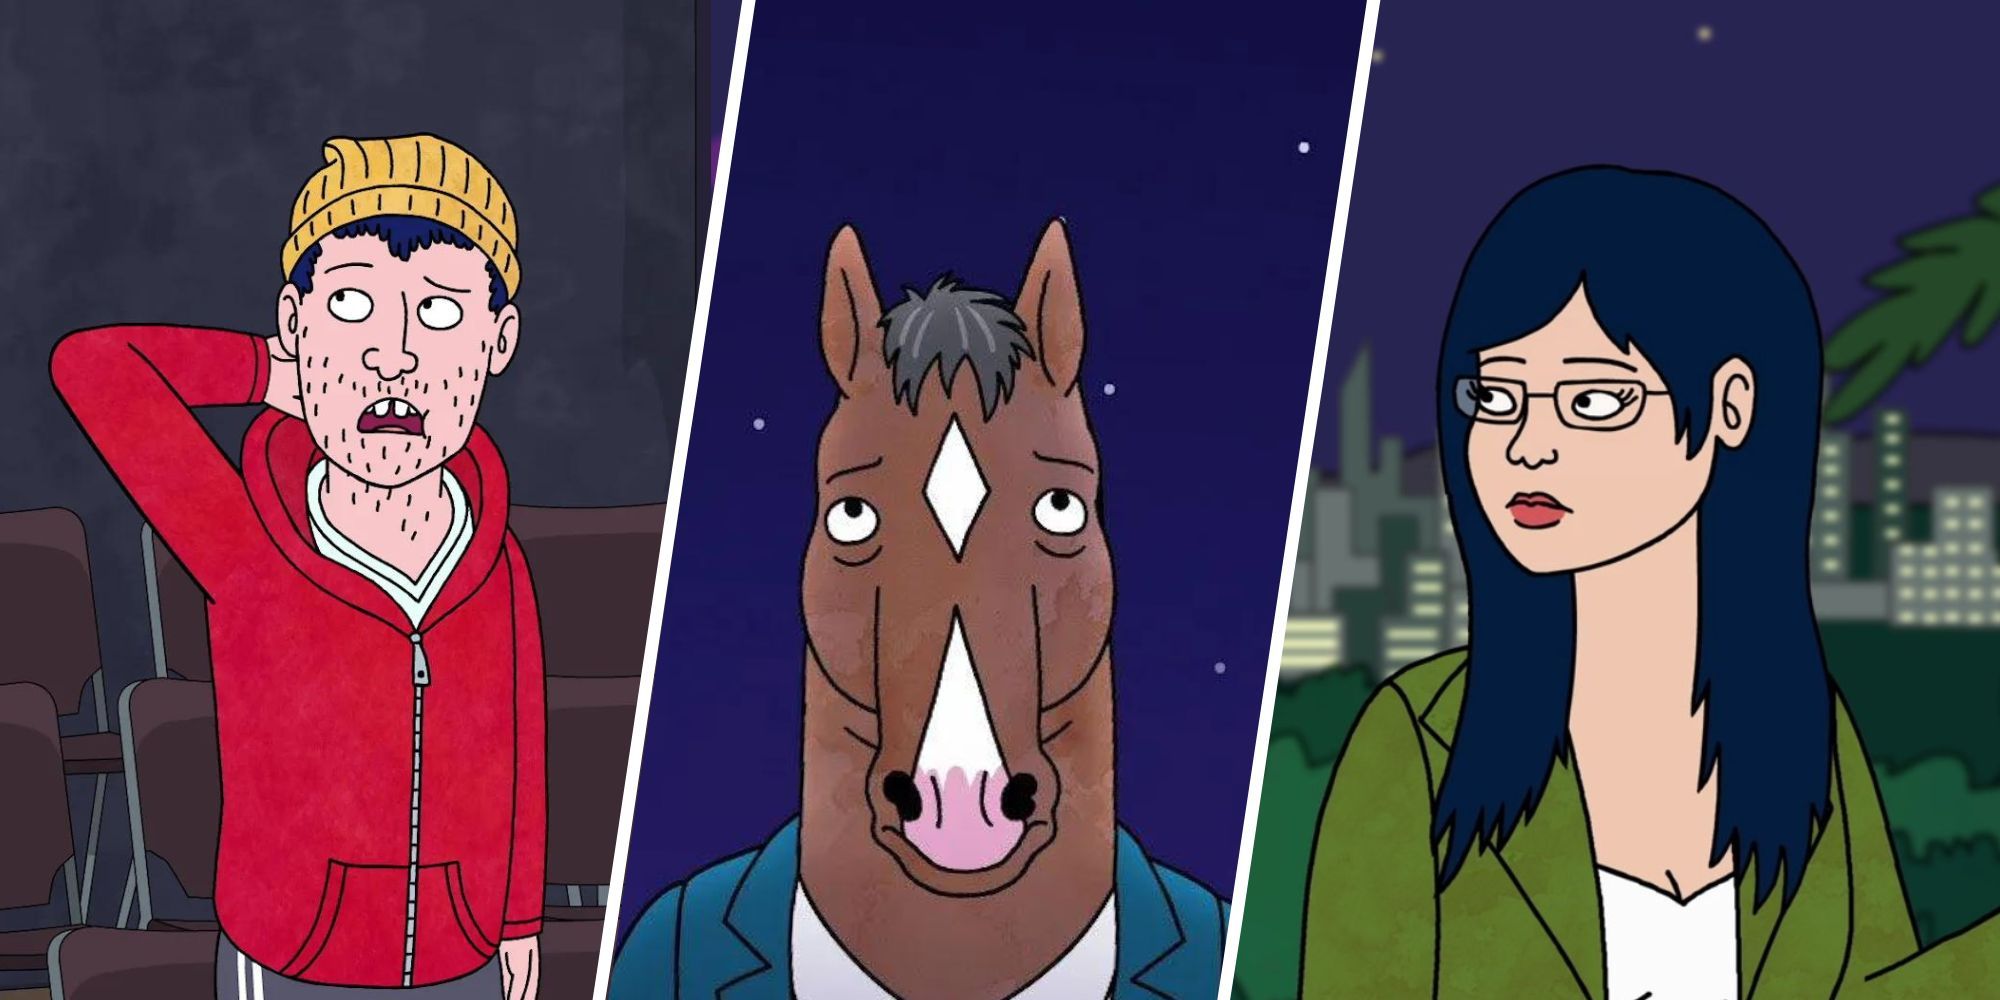 Collage with images of Todd, BoJack, and Diane from 'BoJack Horseman'